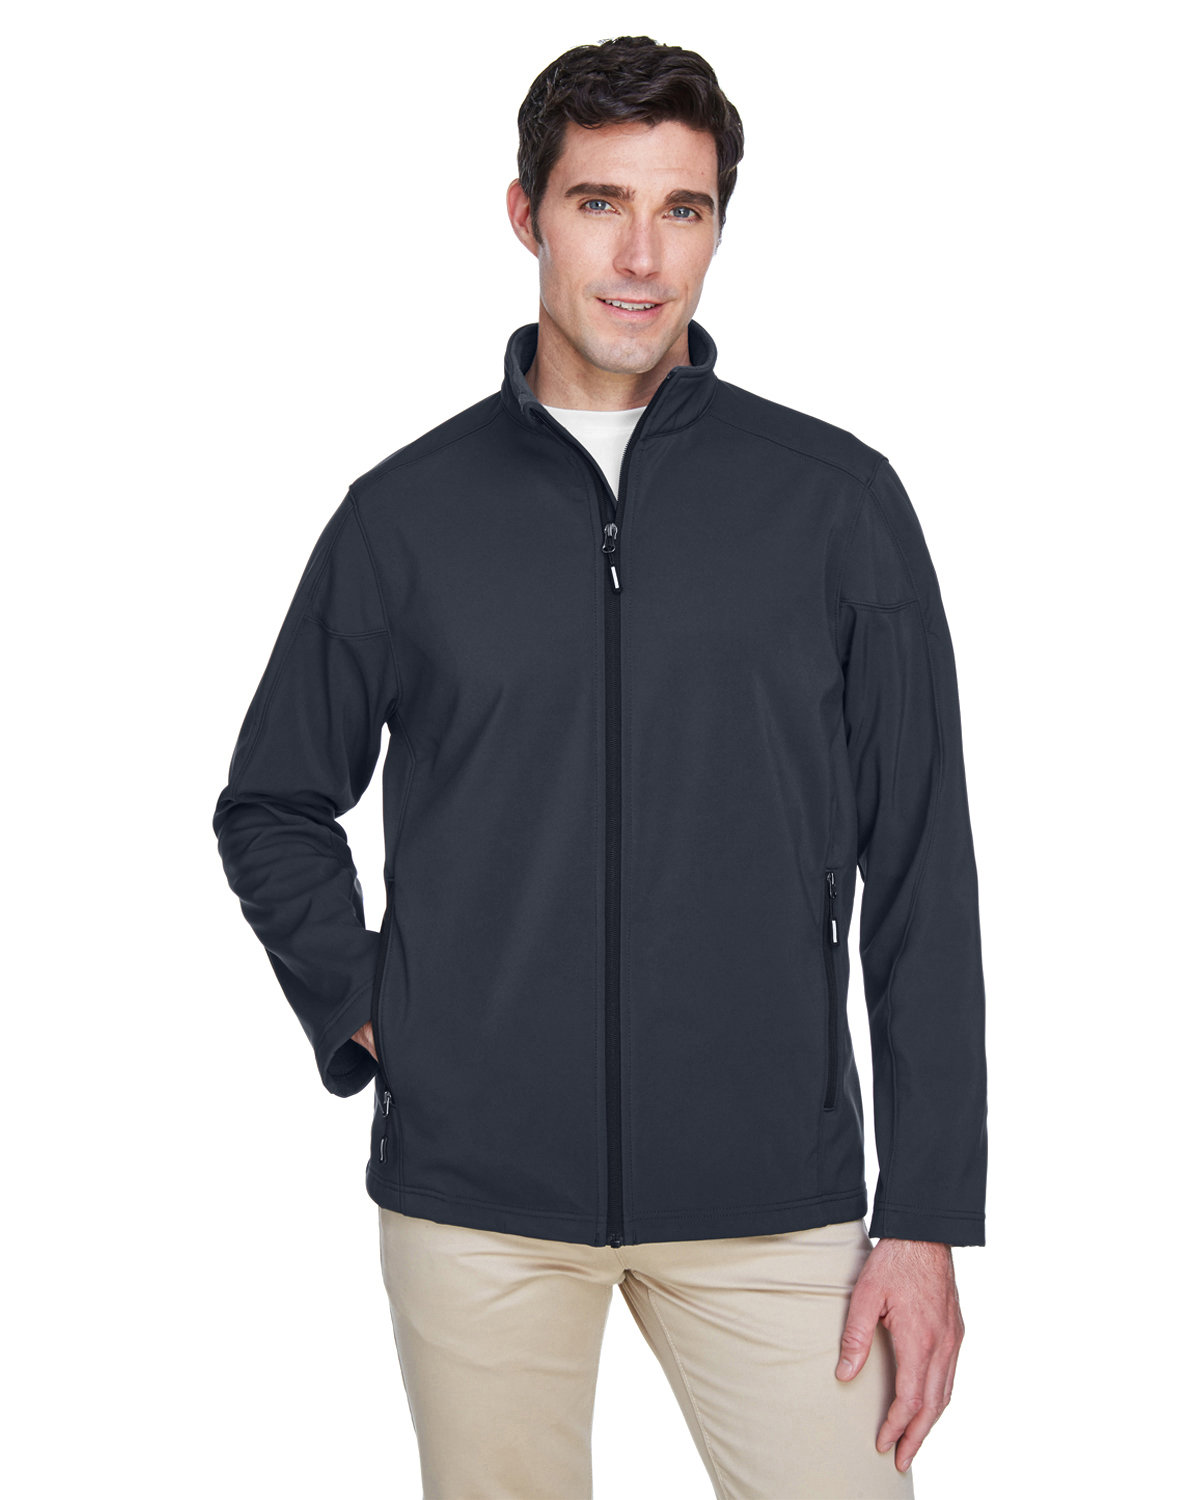 Core 365 Men's Cruise Two-Layer Fleece Bonded Soft Shell Jacket CARBON 